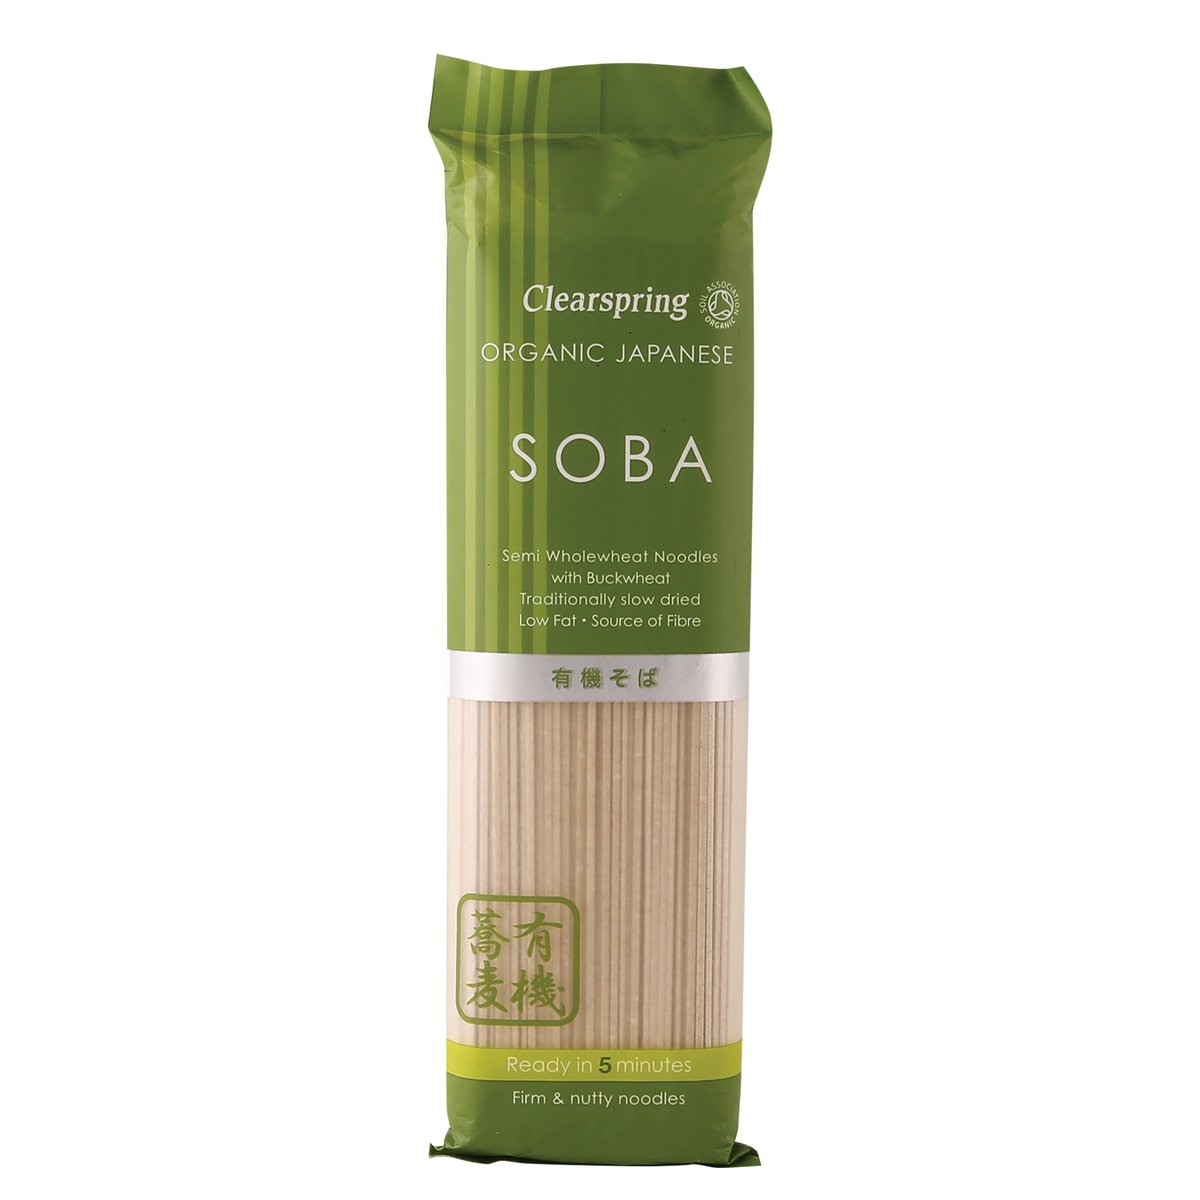 Clearspring Organic Japanese Soba Semi Whole wheat Noodles With Buckwheat 200g